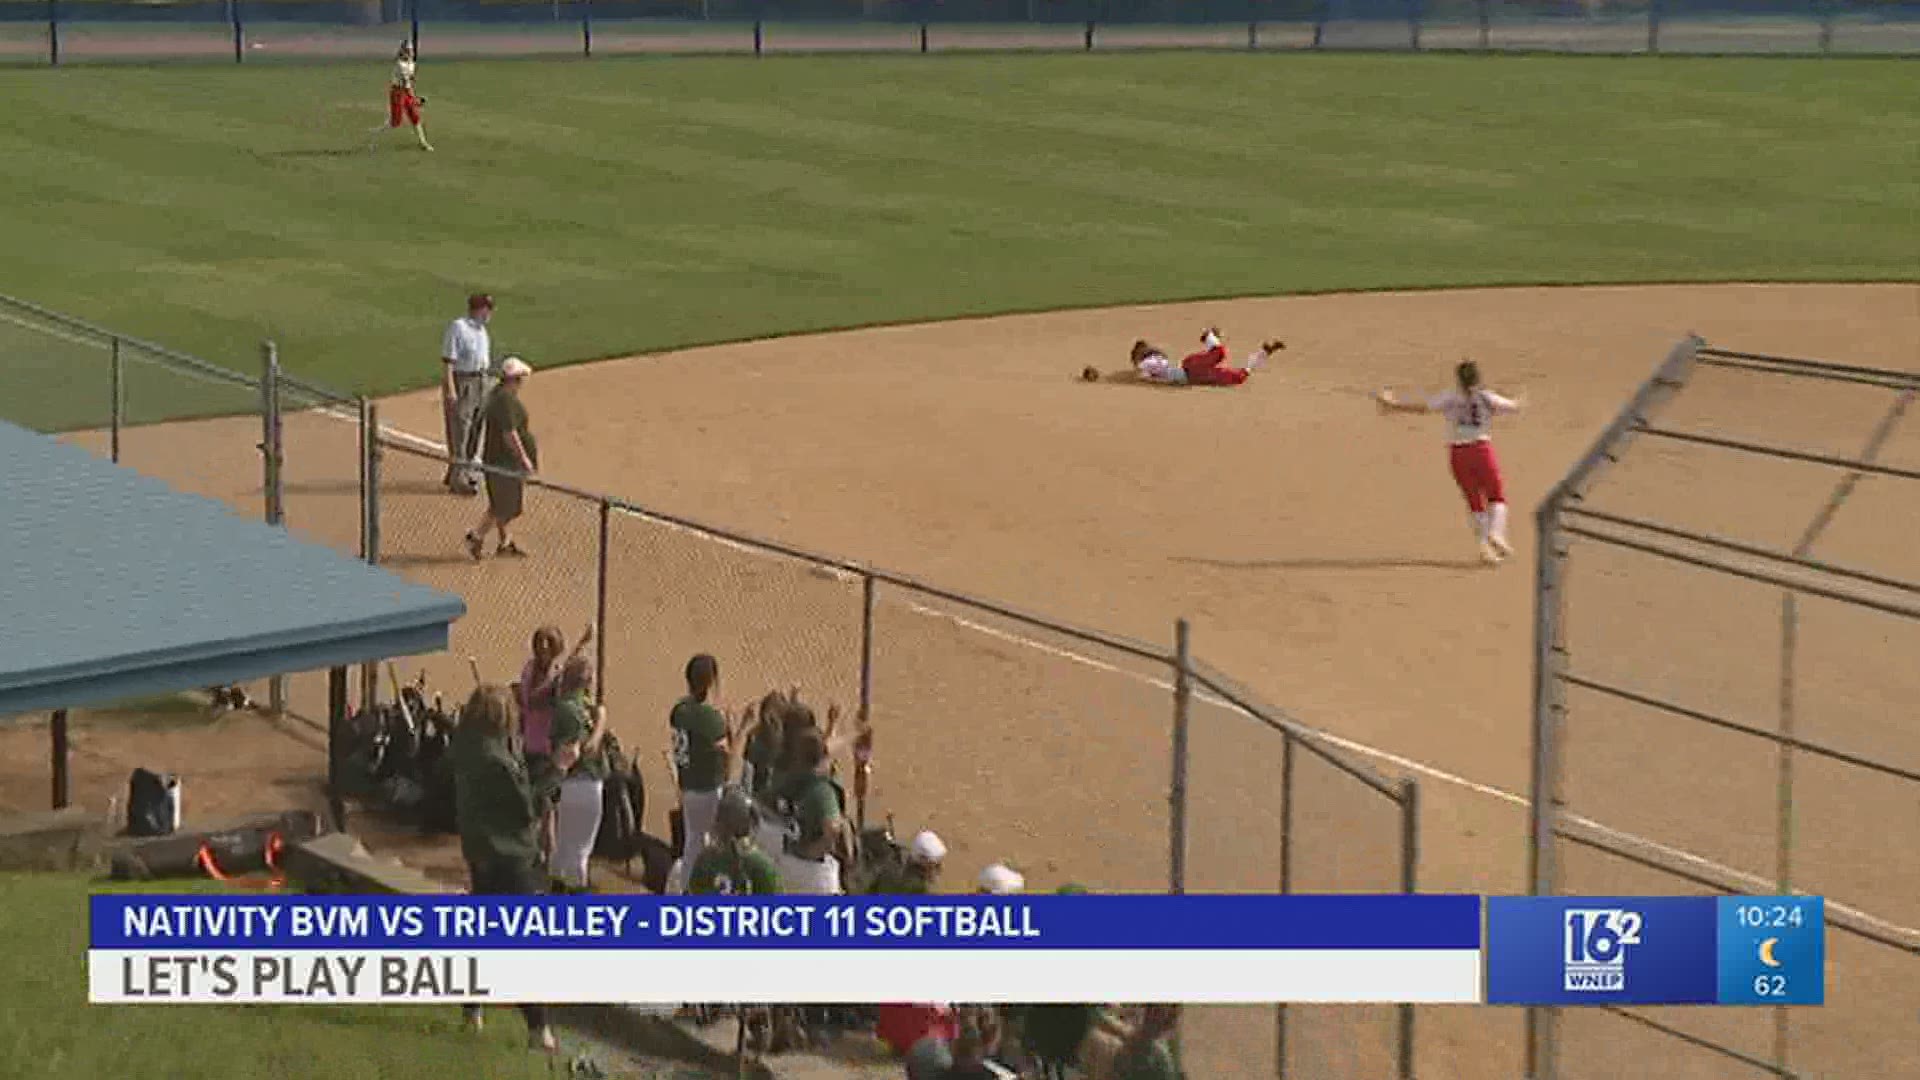 Tri-Valley blanked Nativity BVM in the District XI HS softball playoffs.